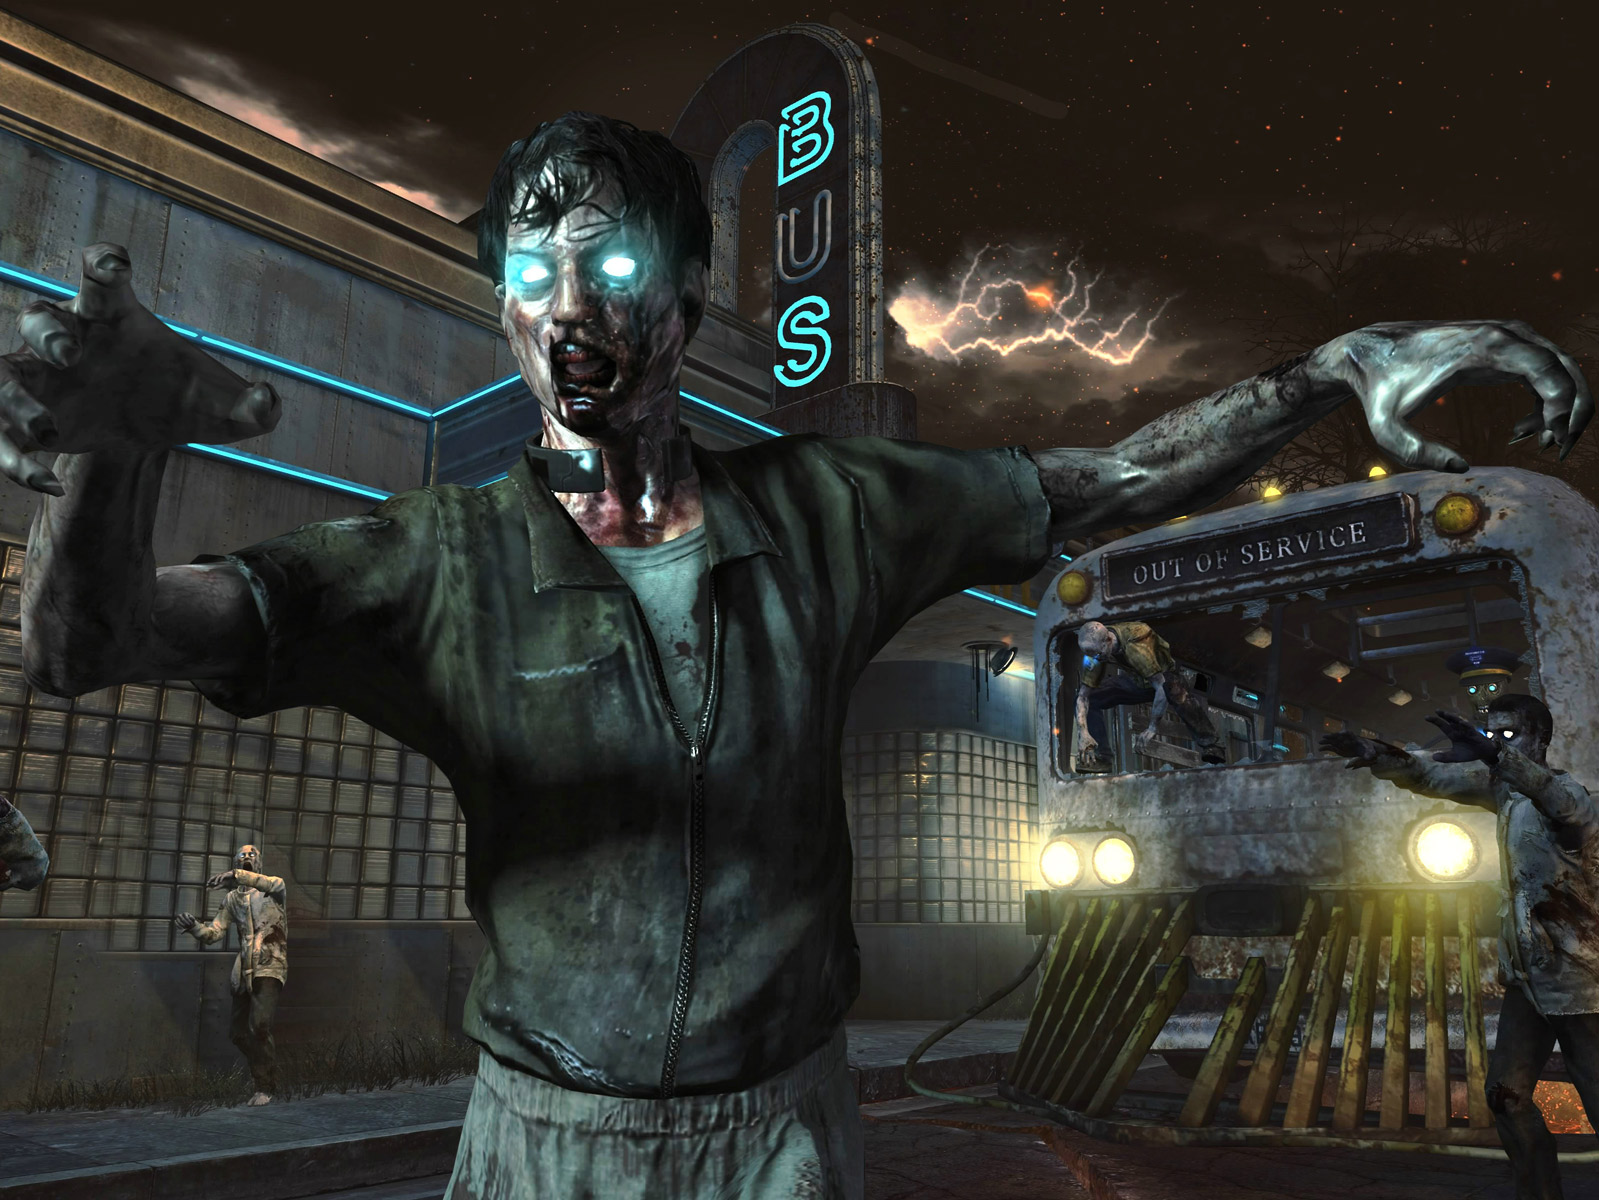 Play Call of Duty Black Ops Zombies Video Game For Free Today!